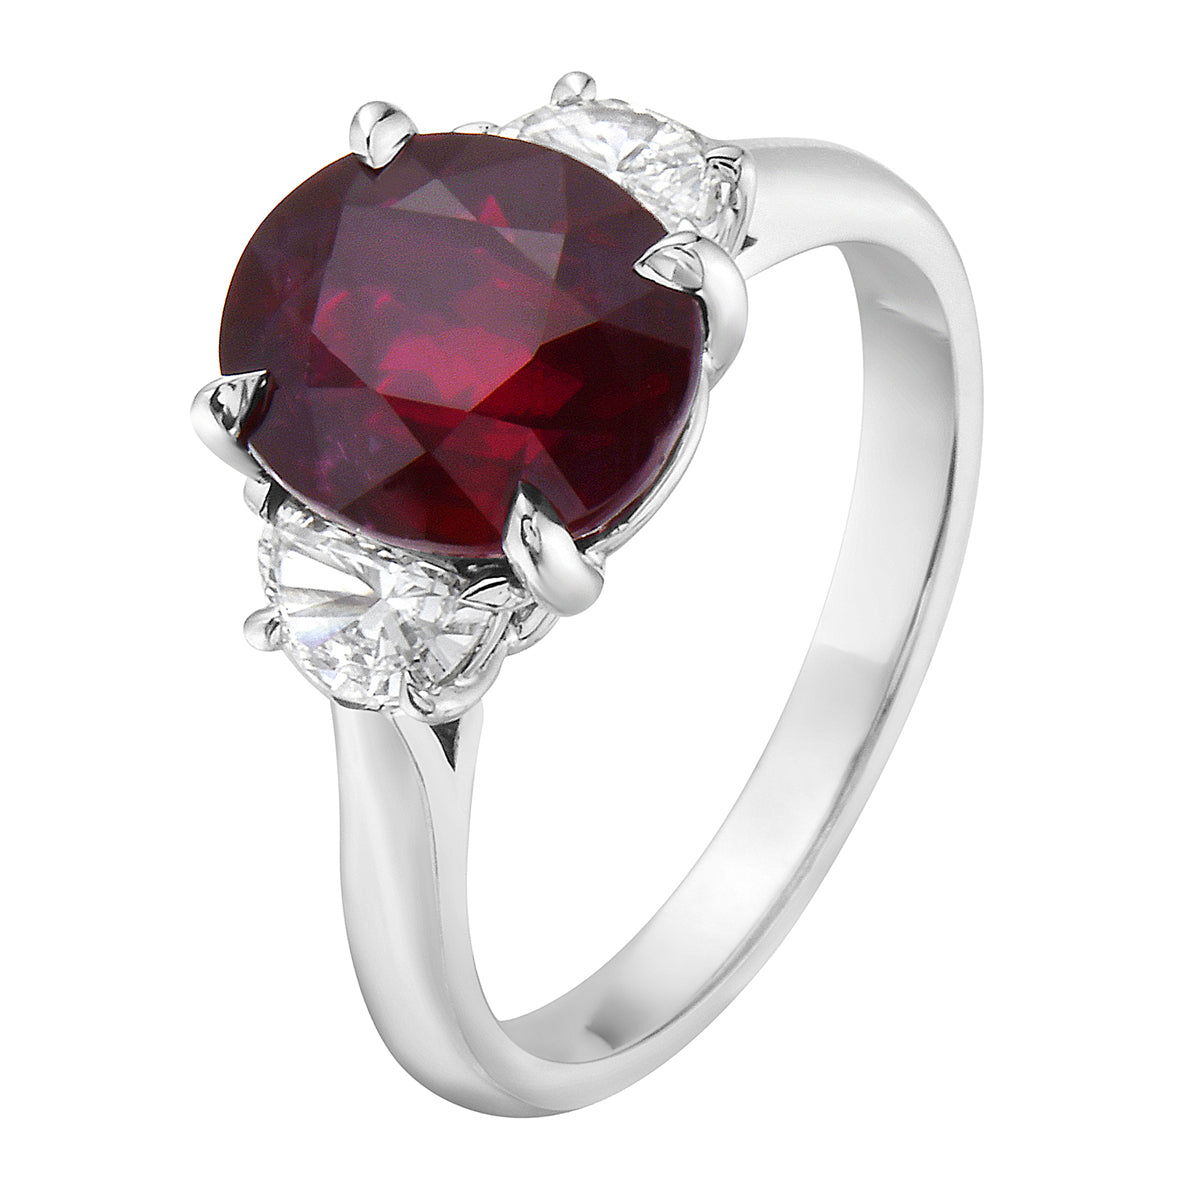 Ring 18KW 1RUBY-4.42CT 2HM-0.44CT GIA6224516349